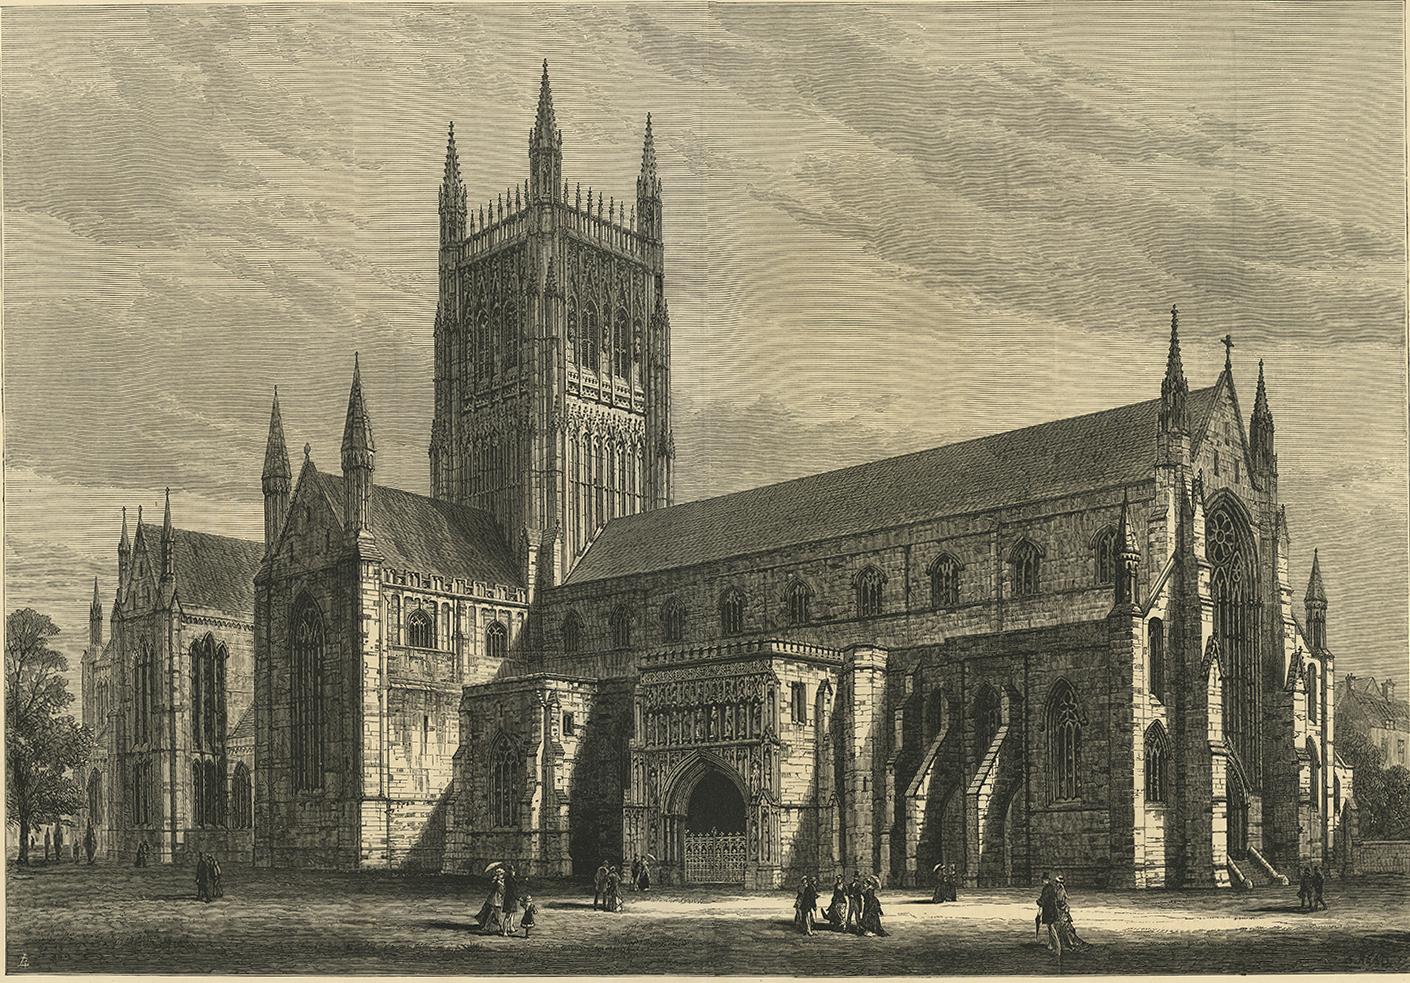 Antique print titled 'Worcester Cathedral'. Original antique print of Worcester Cathedral, an Anglican cathedral in Worcester, England; situated on a bank overlooking the River Severn. It is the seat of the Bishop of Worcester. Its official name is